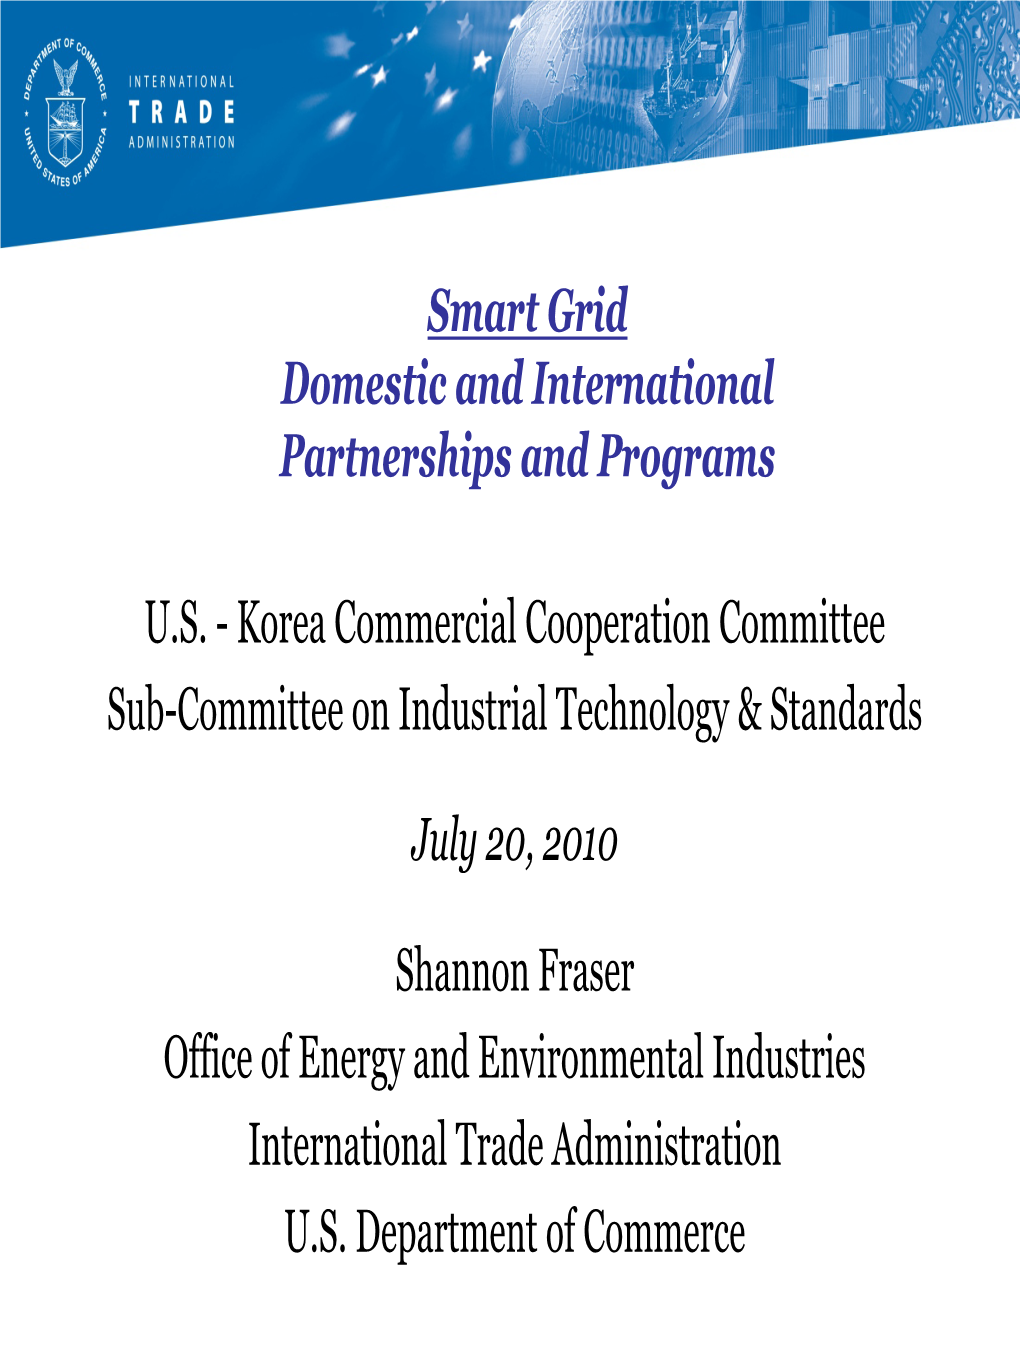 Smart Grid Domestic and International Partnerships and Programs